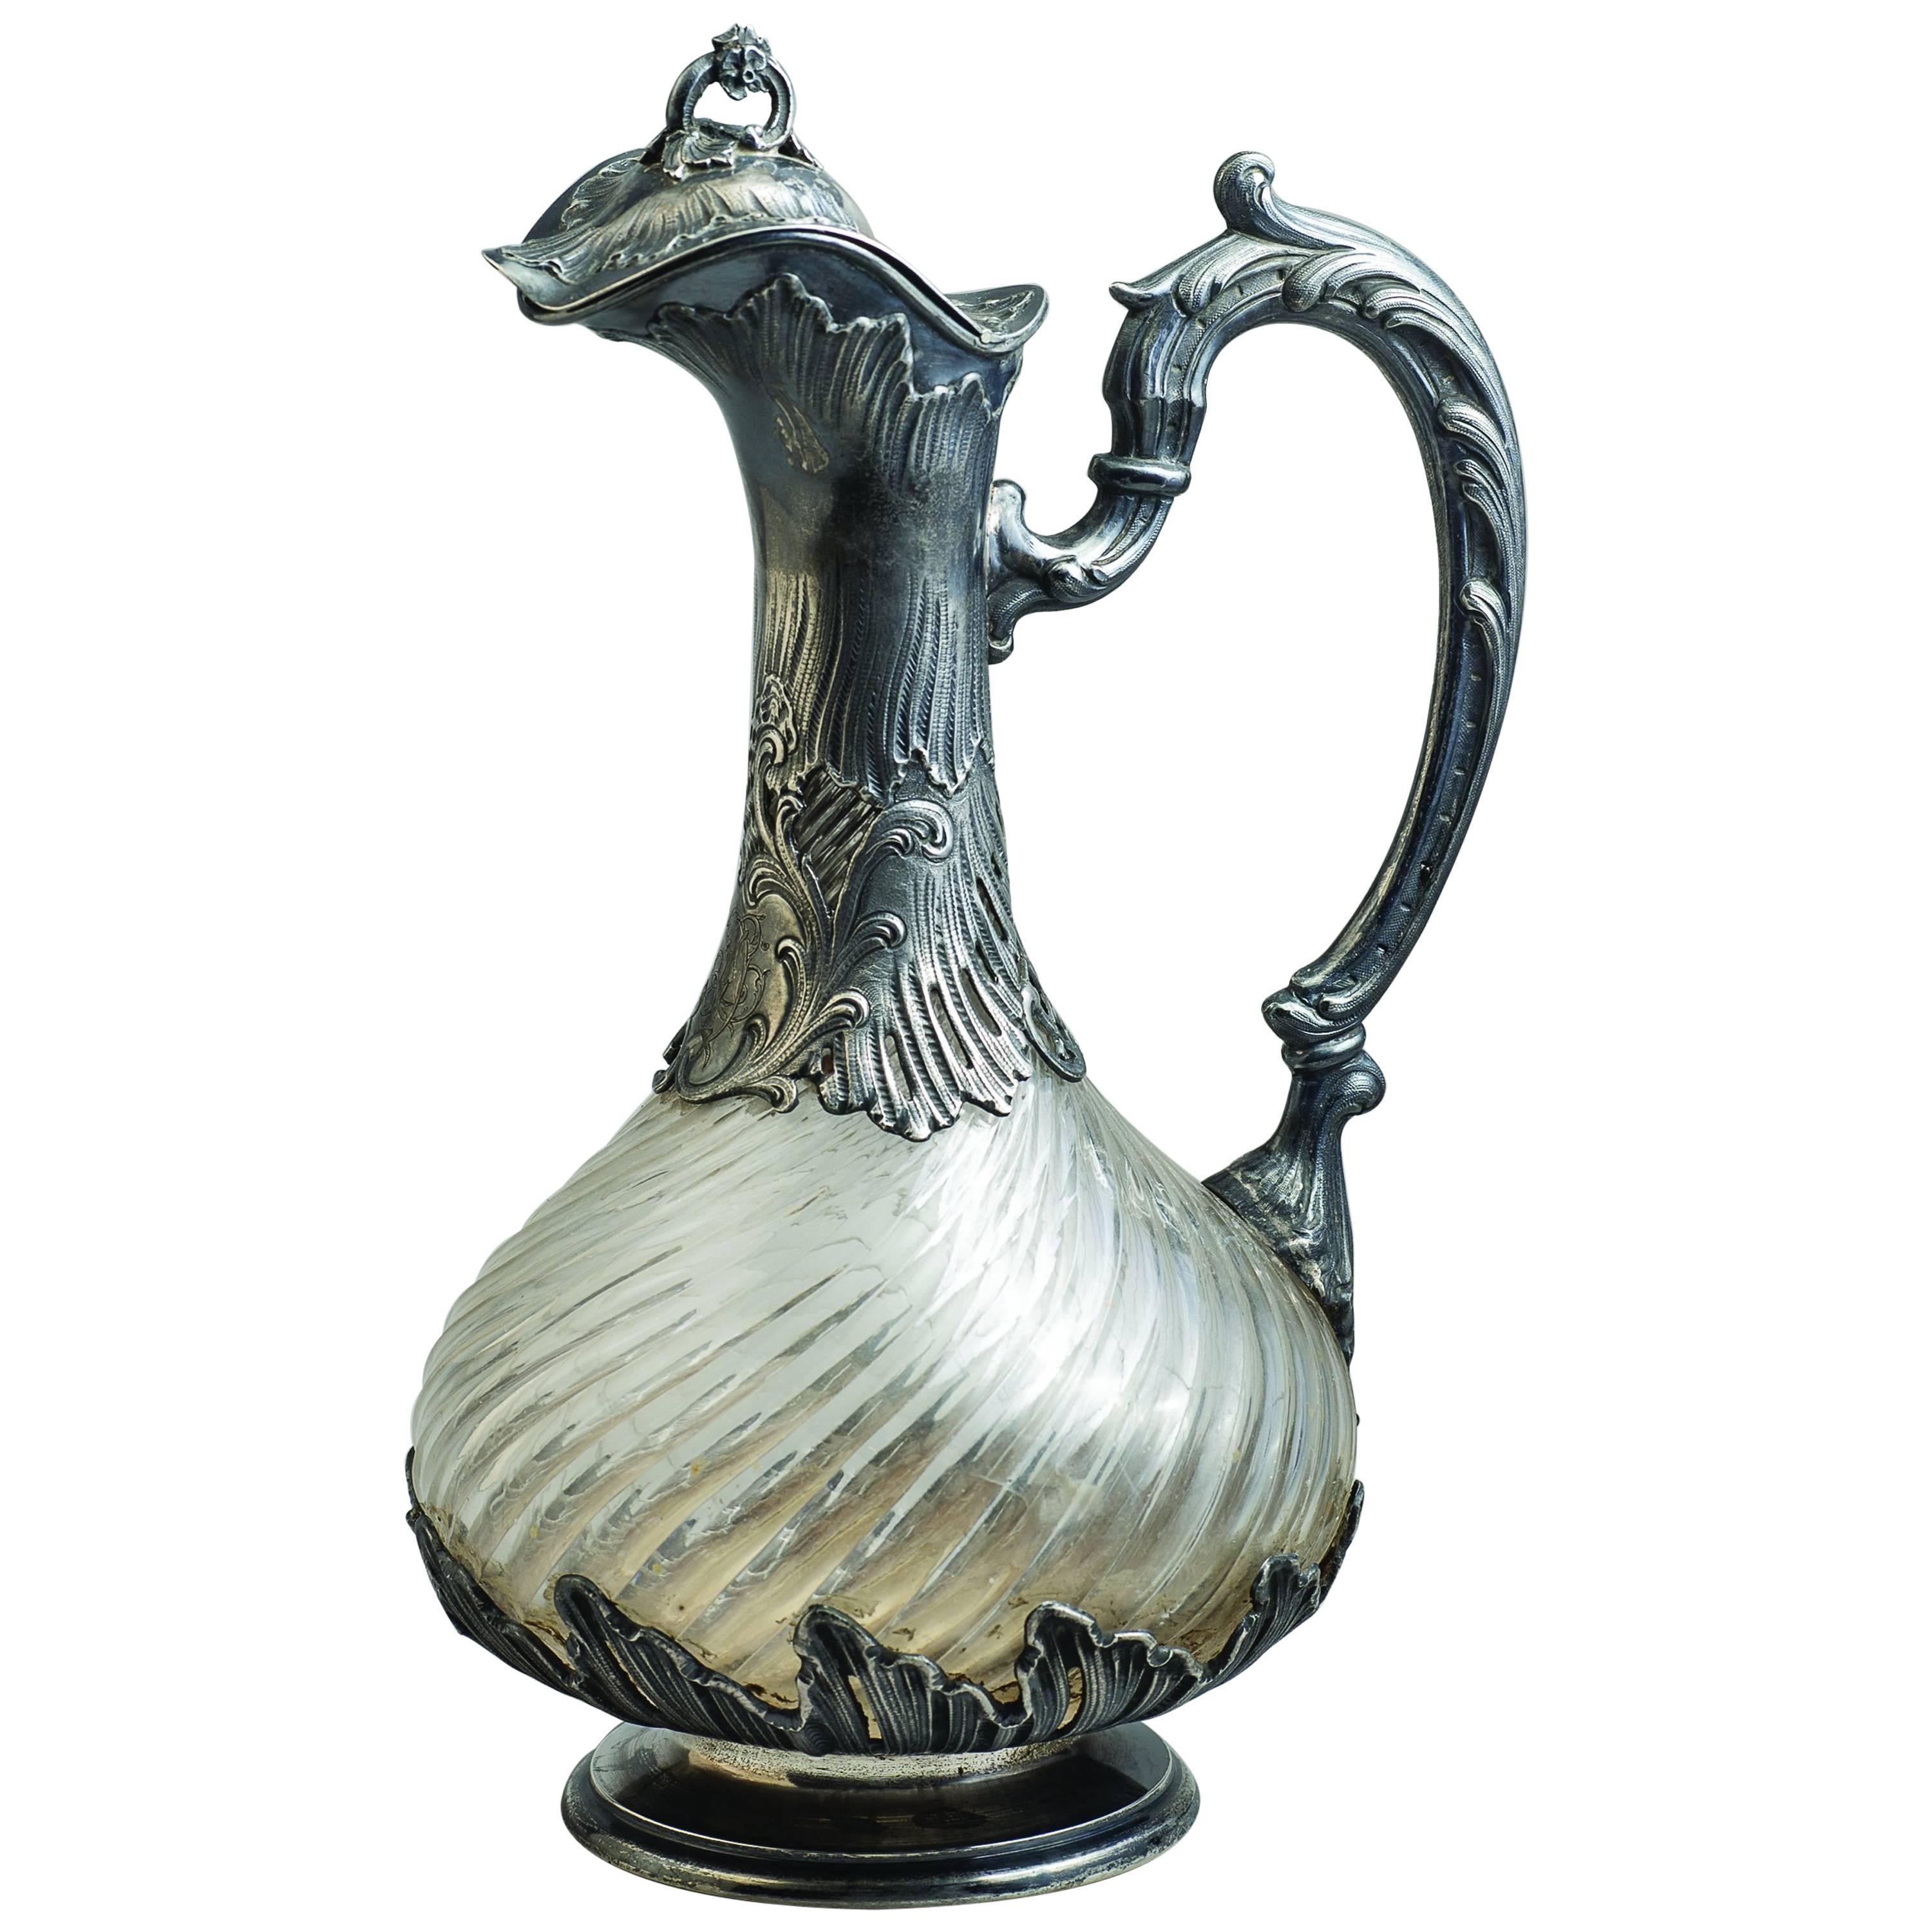 Veyrat French Sterling and Crystal "Aiguière" Claret Jug, circa 1880